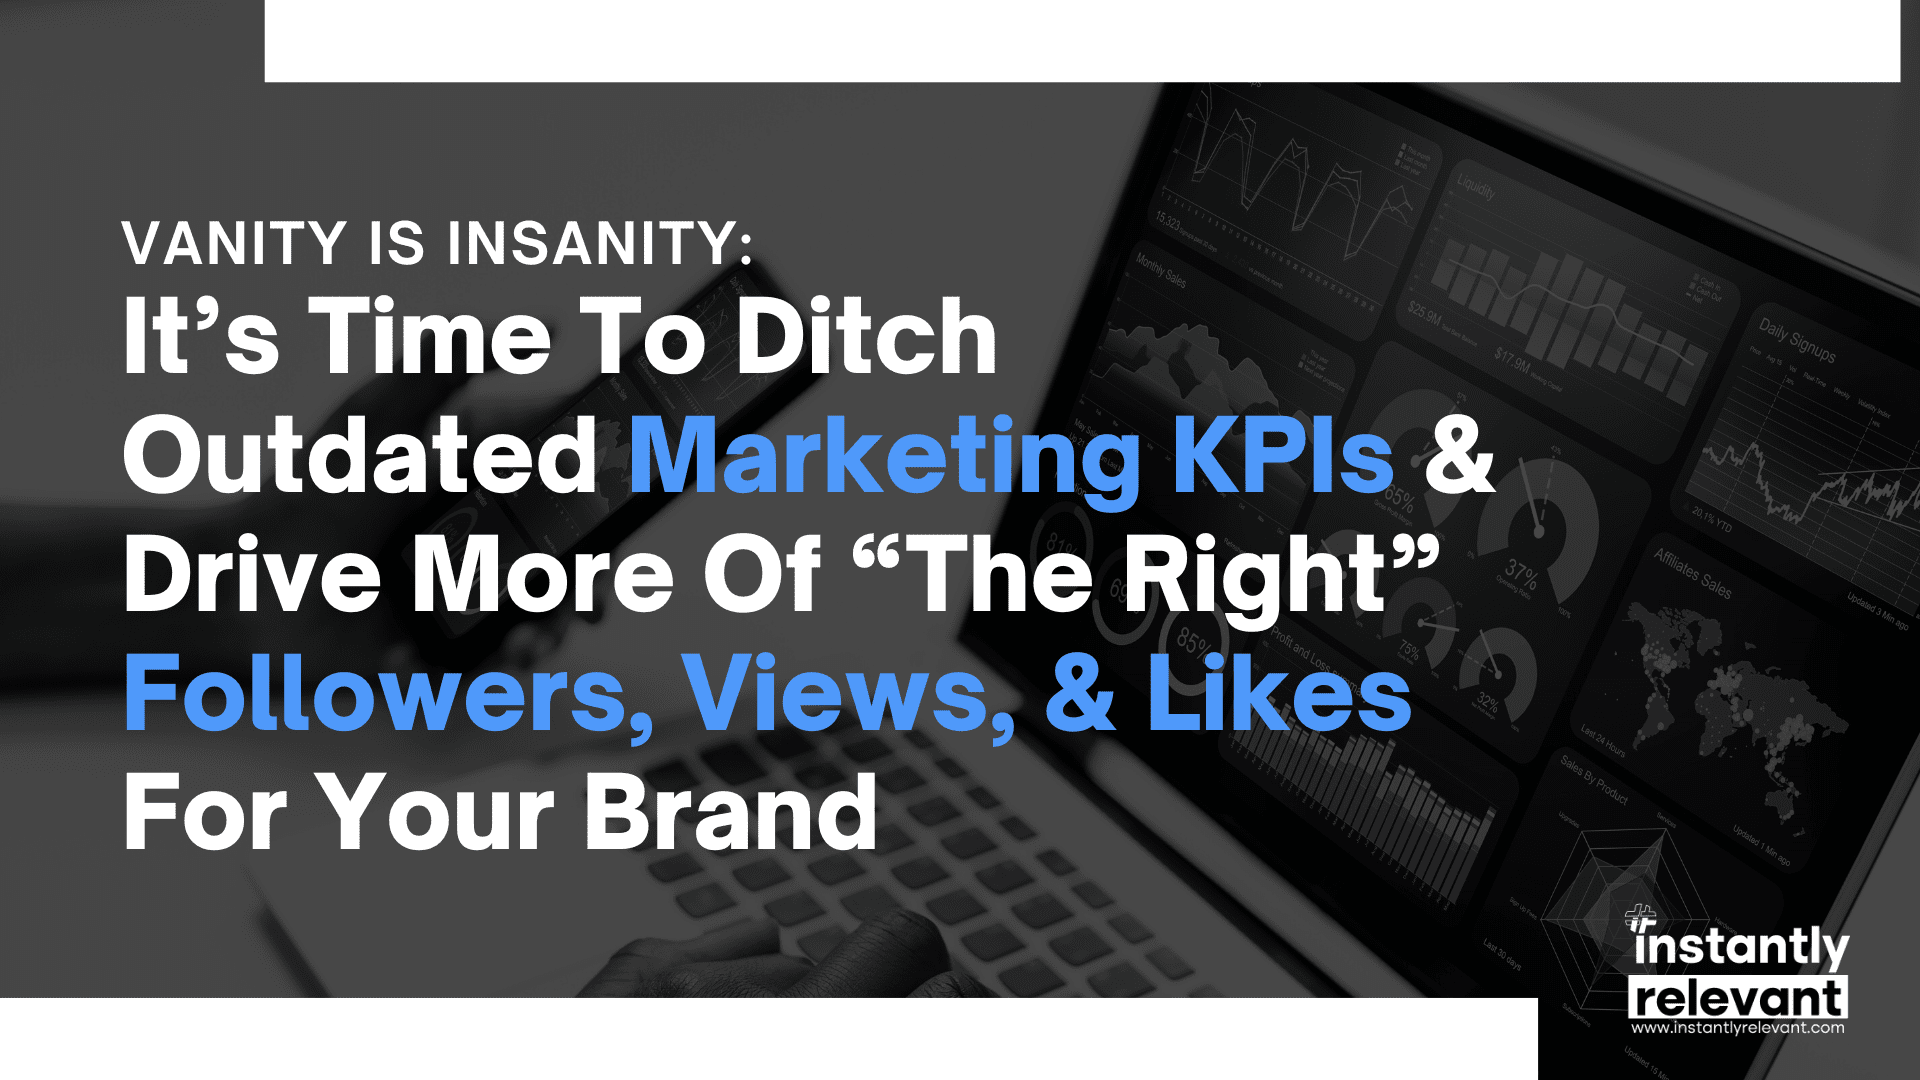 Vanity Is Insanity: It’s Time To Ditch Outdated Marketing KPIs & Drive More Of “The Right” Followers, Views, & Likes For Your Brand